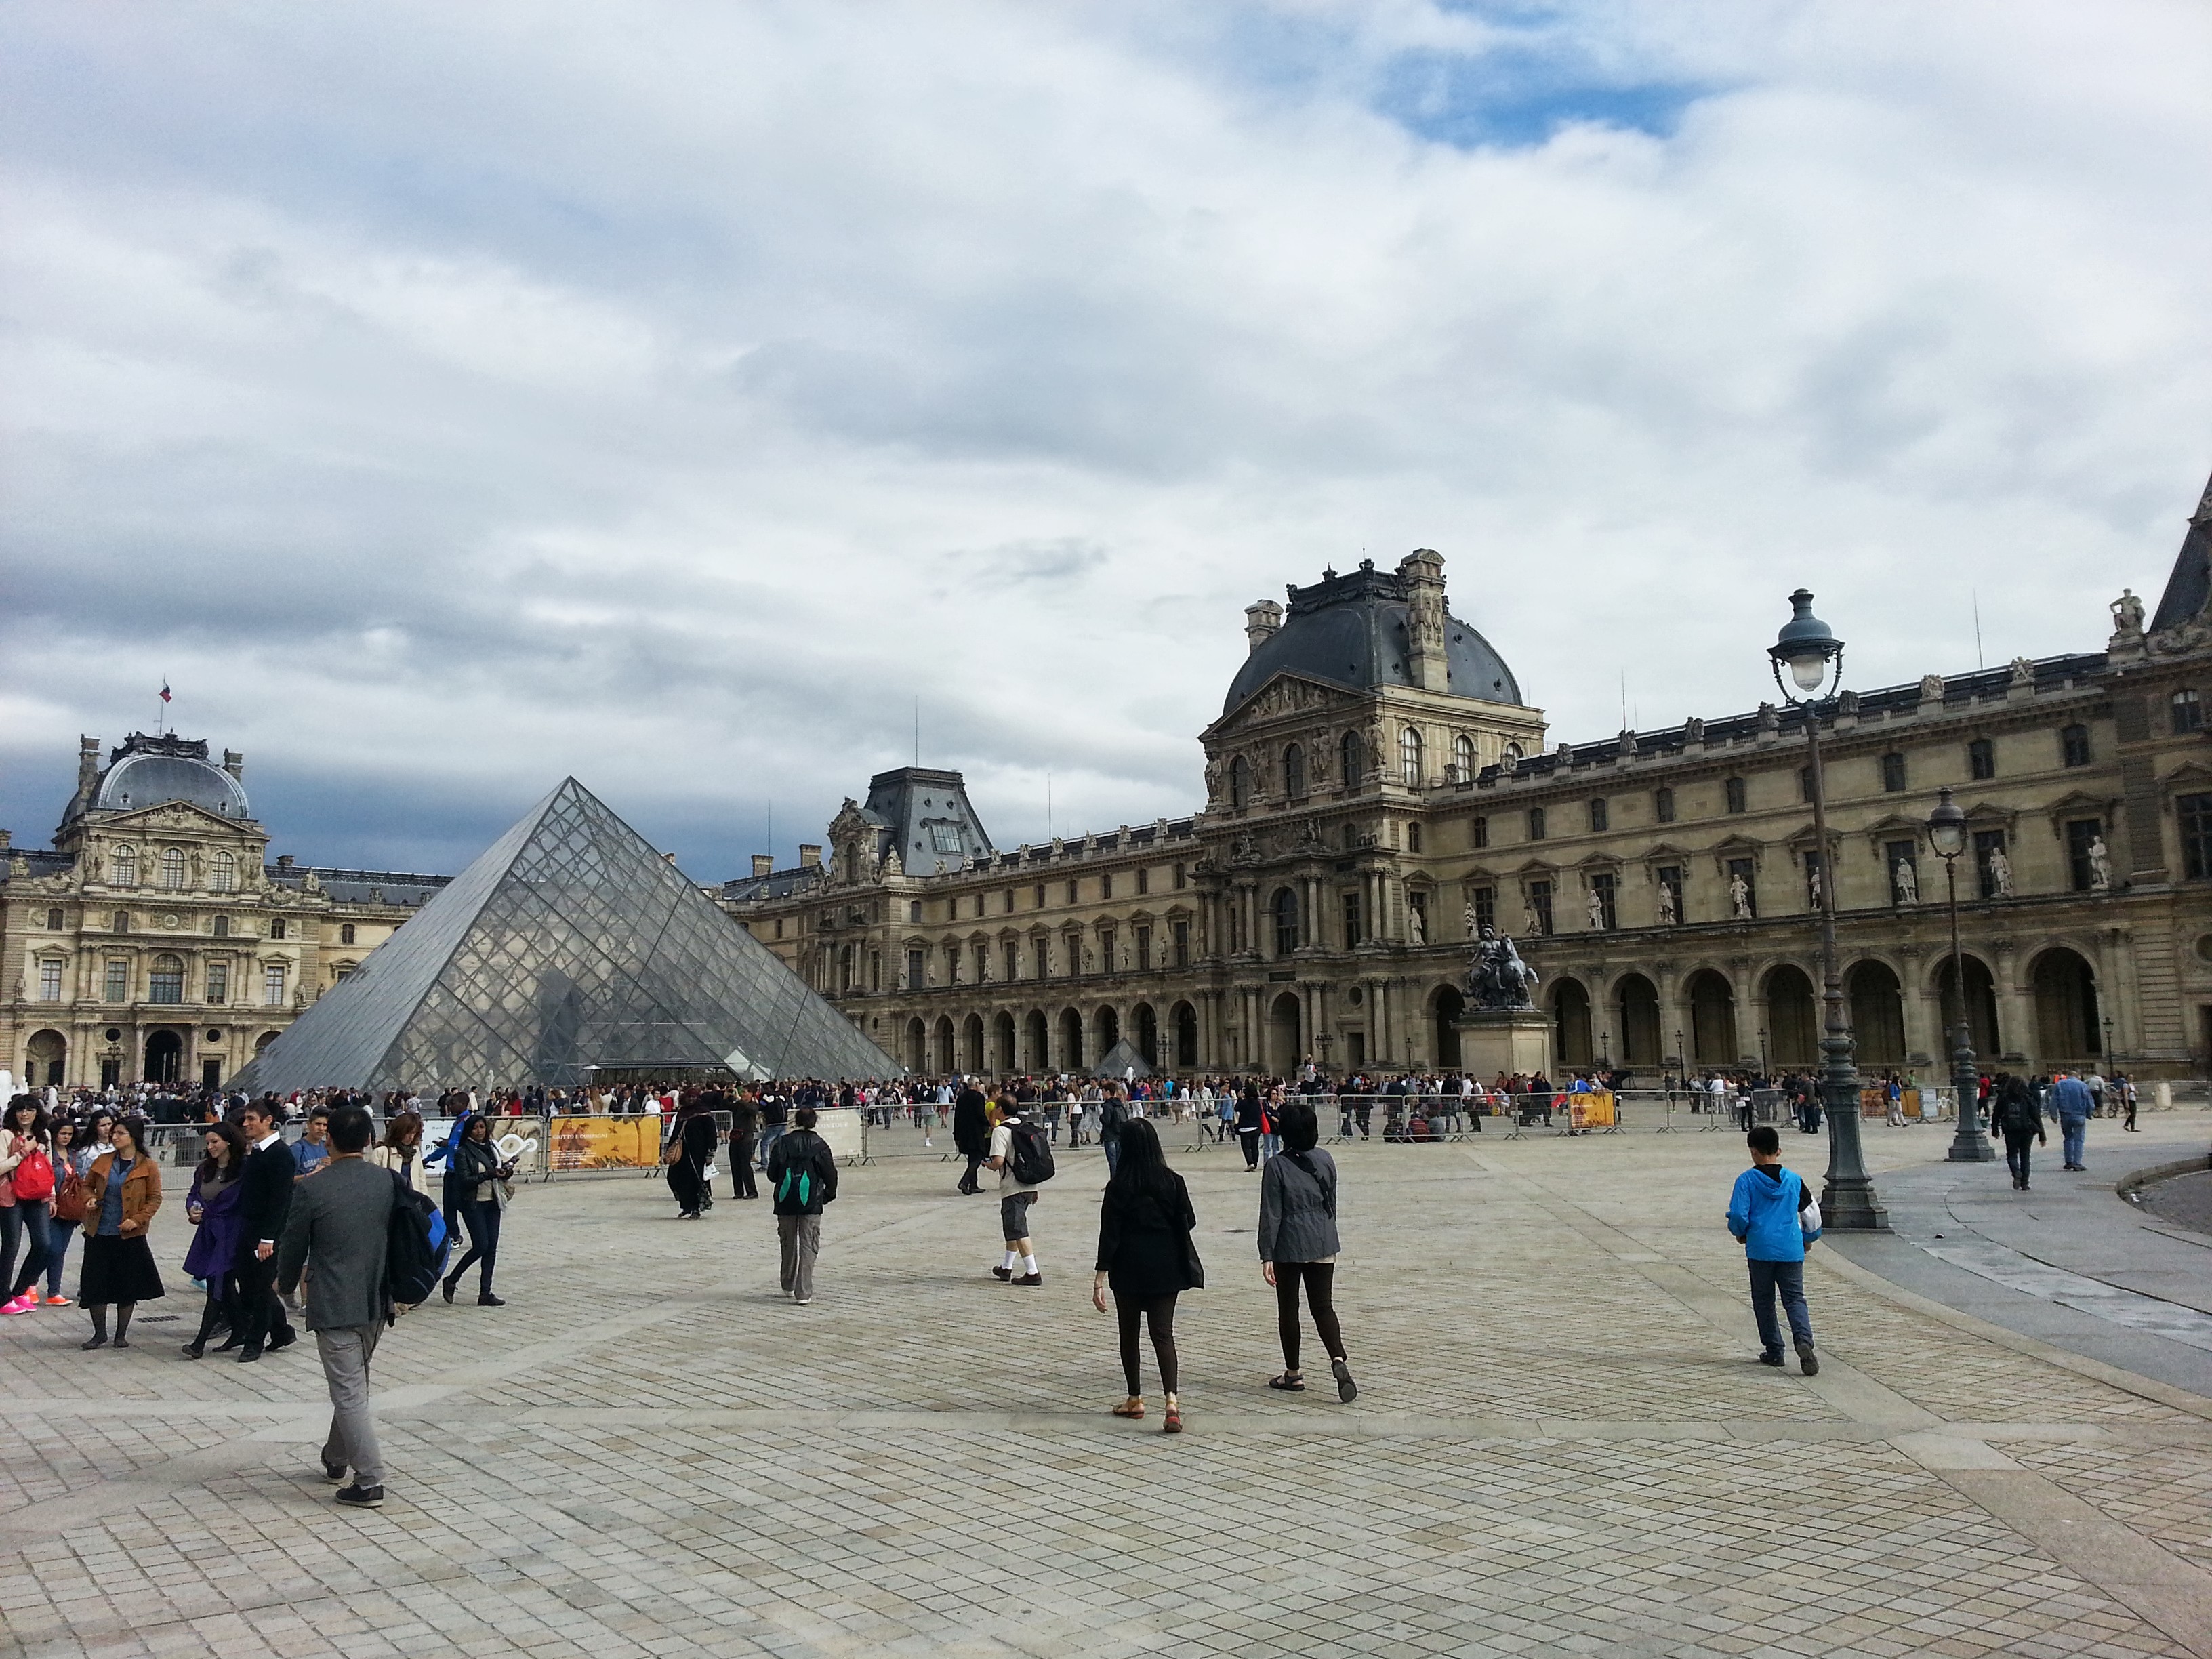 The Louvre Plaza